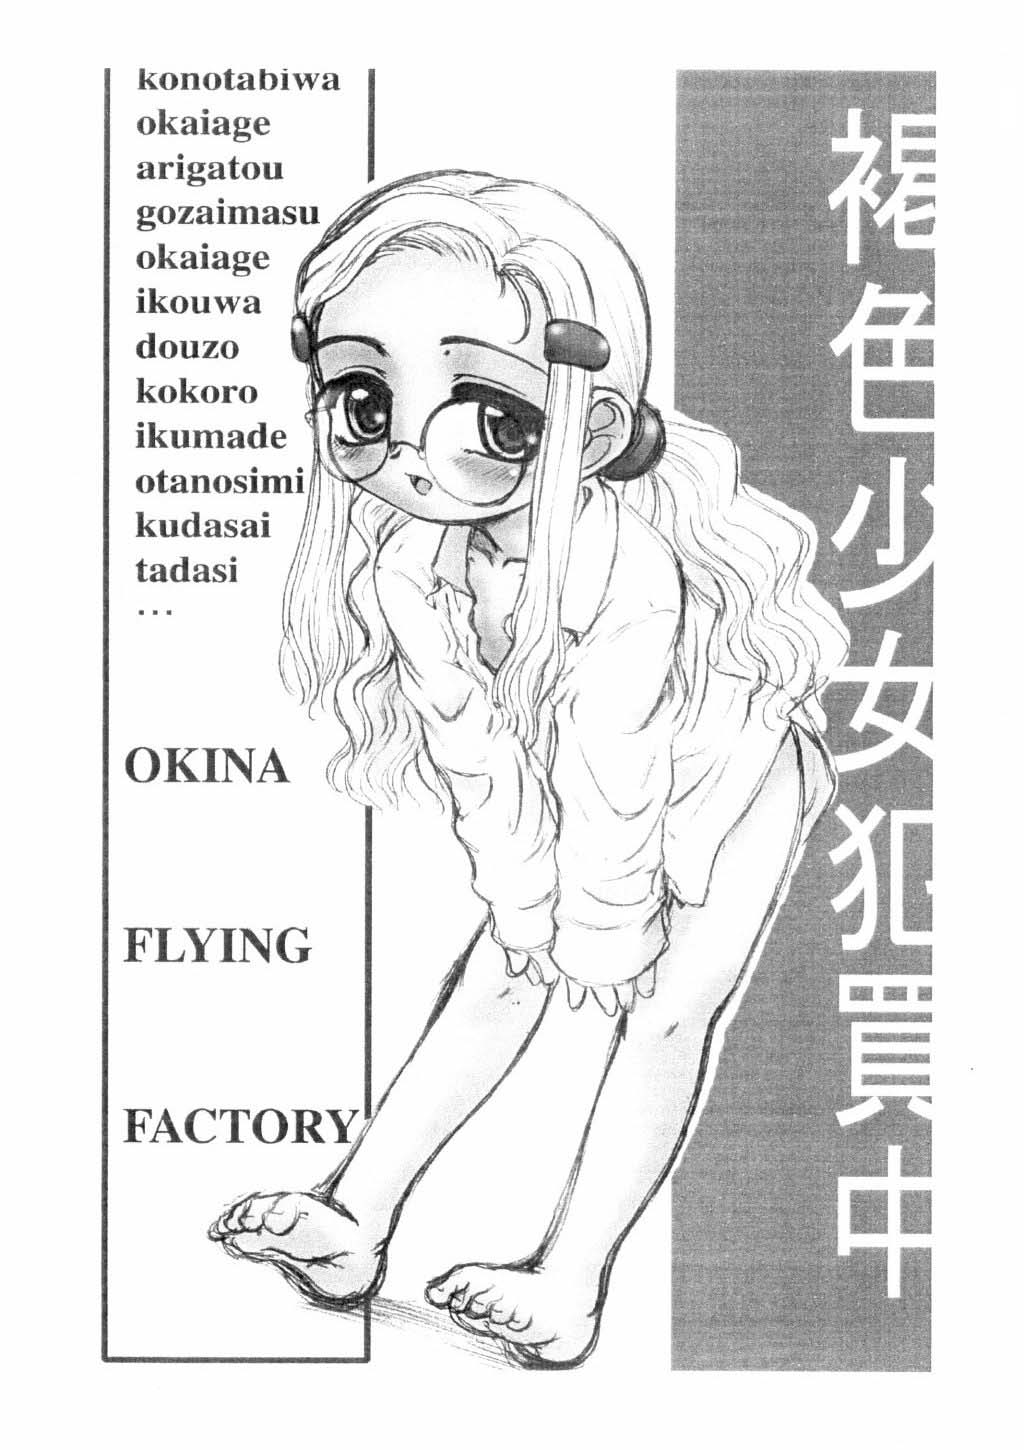 [OKINA FLYING FACTORY] OFF C62 Copybook page 6 full